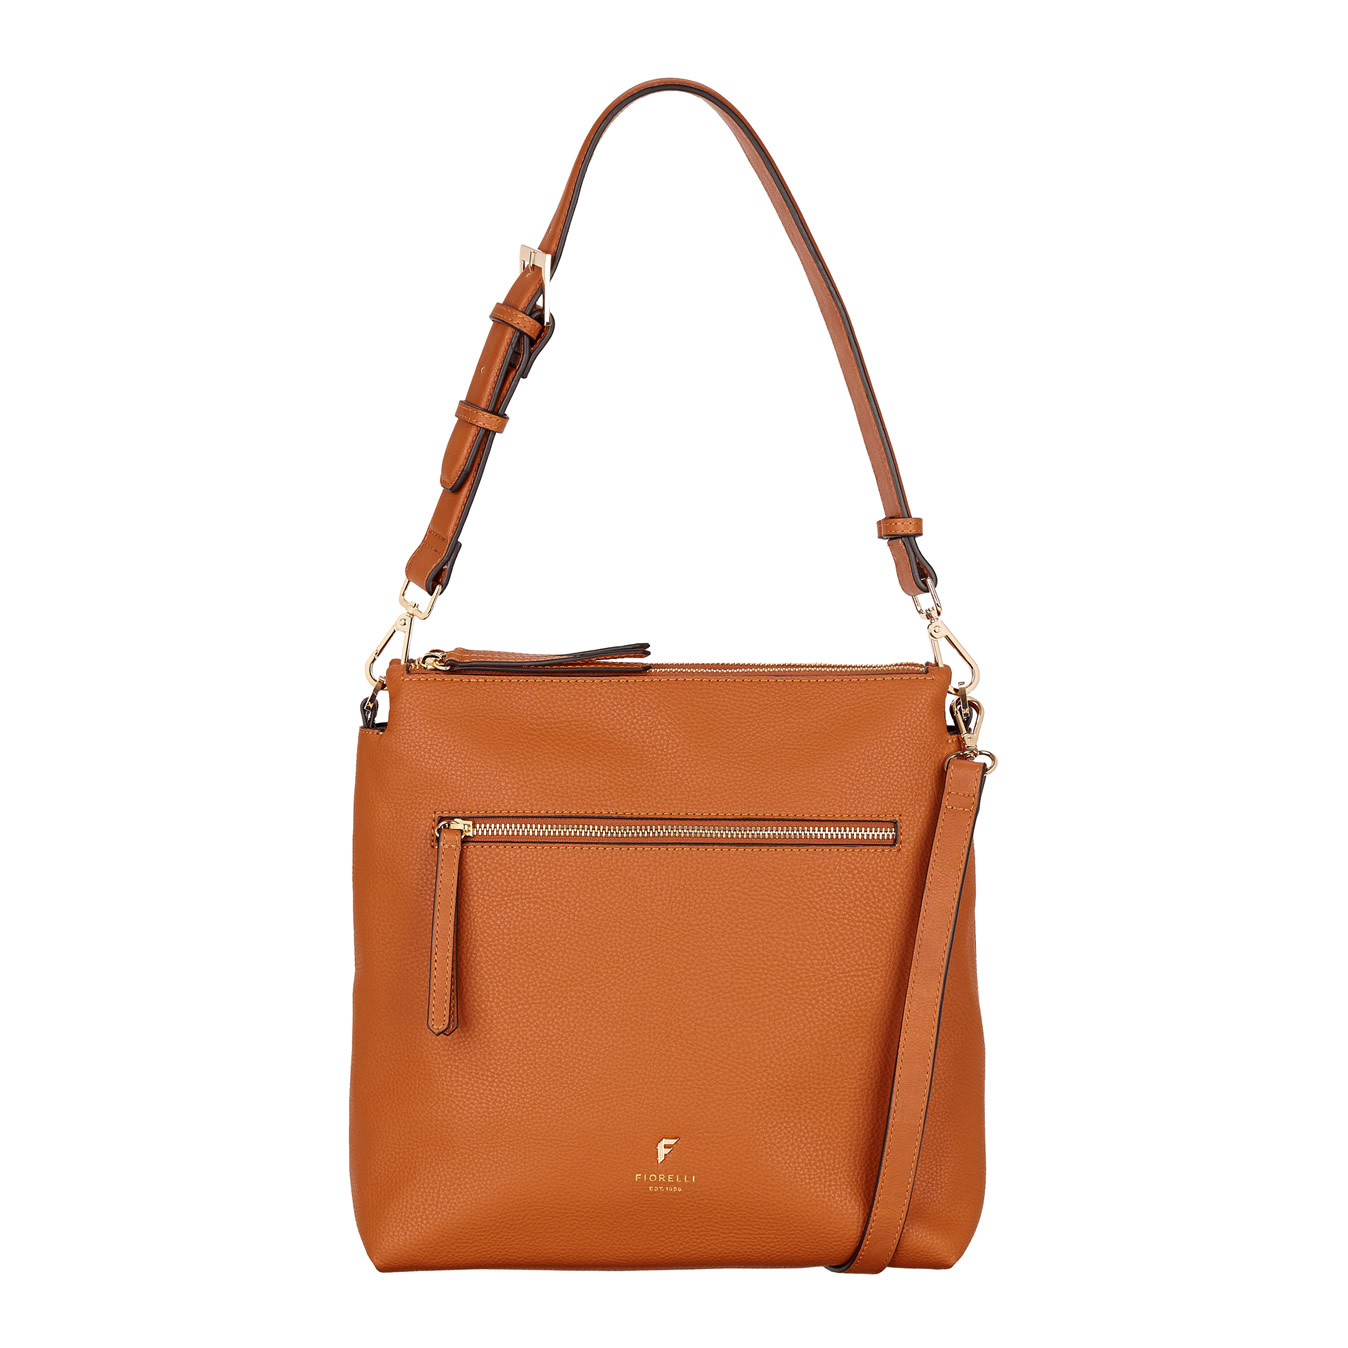 Brown Fiorelli Cross Body Bag and Matching Purse